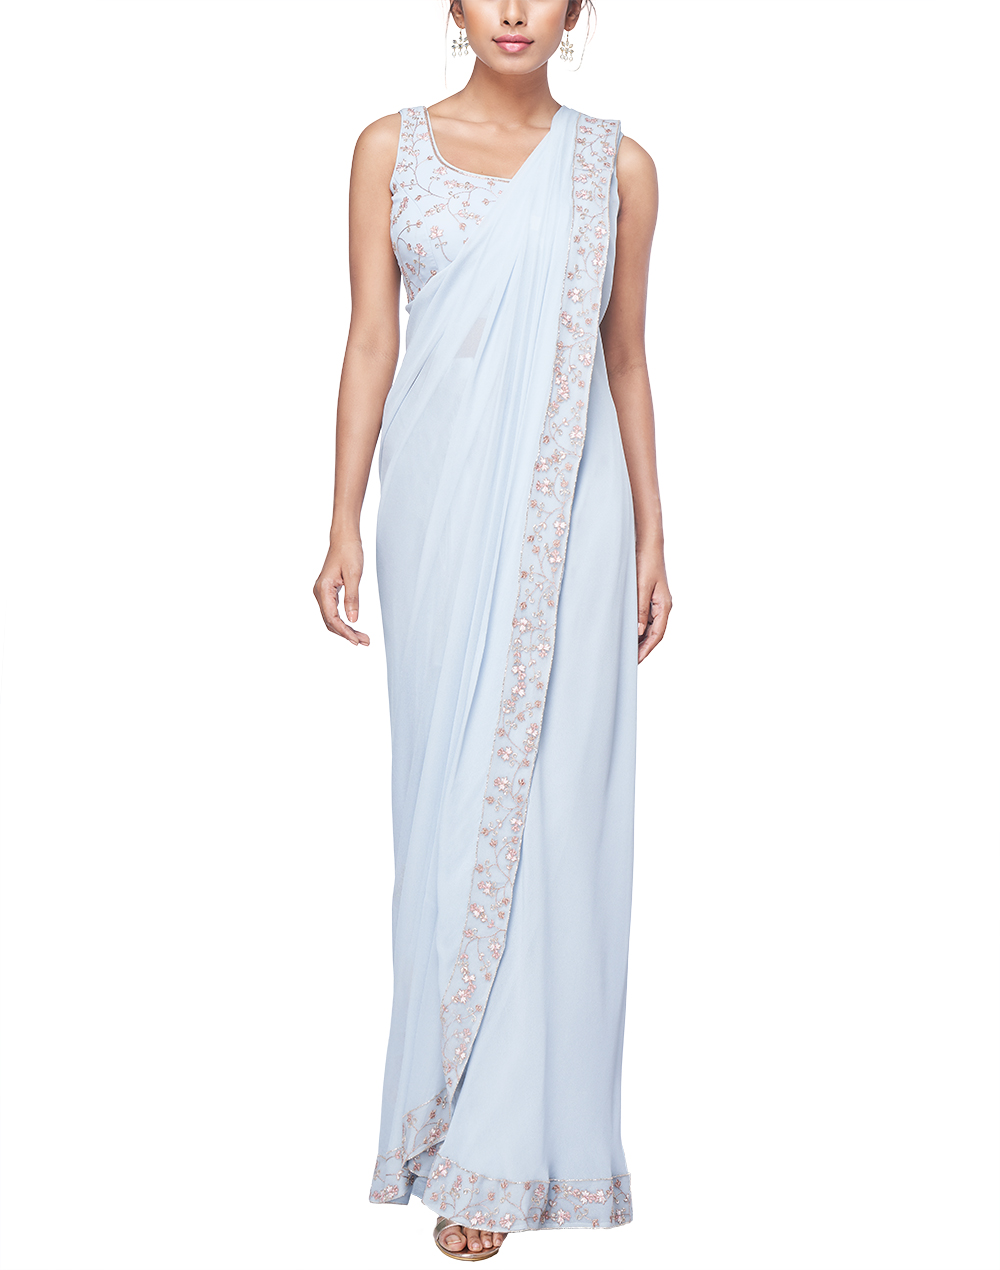 Tasuvure Indies Flavina Pre-draped Saree Gown | Blue, Sequin, Pleated, V  Neck, Sleeveless | Saree gown, Draped saree gown, Saree